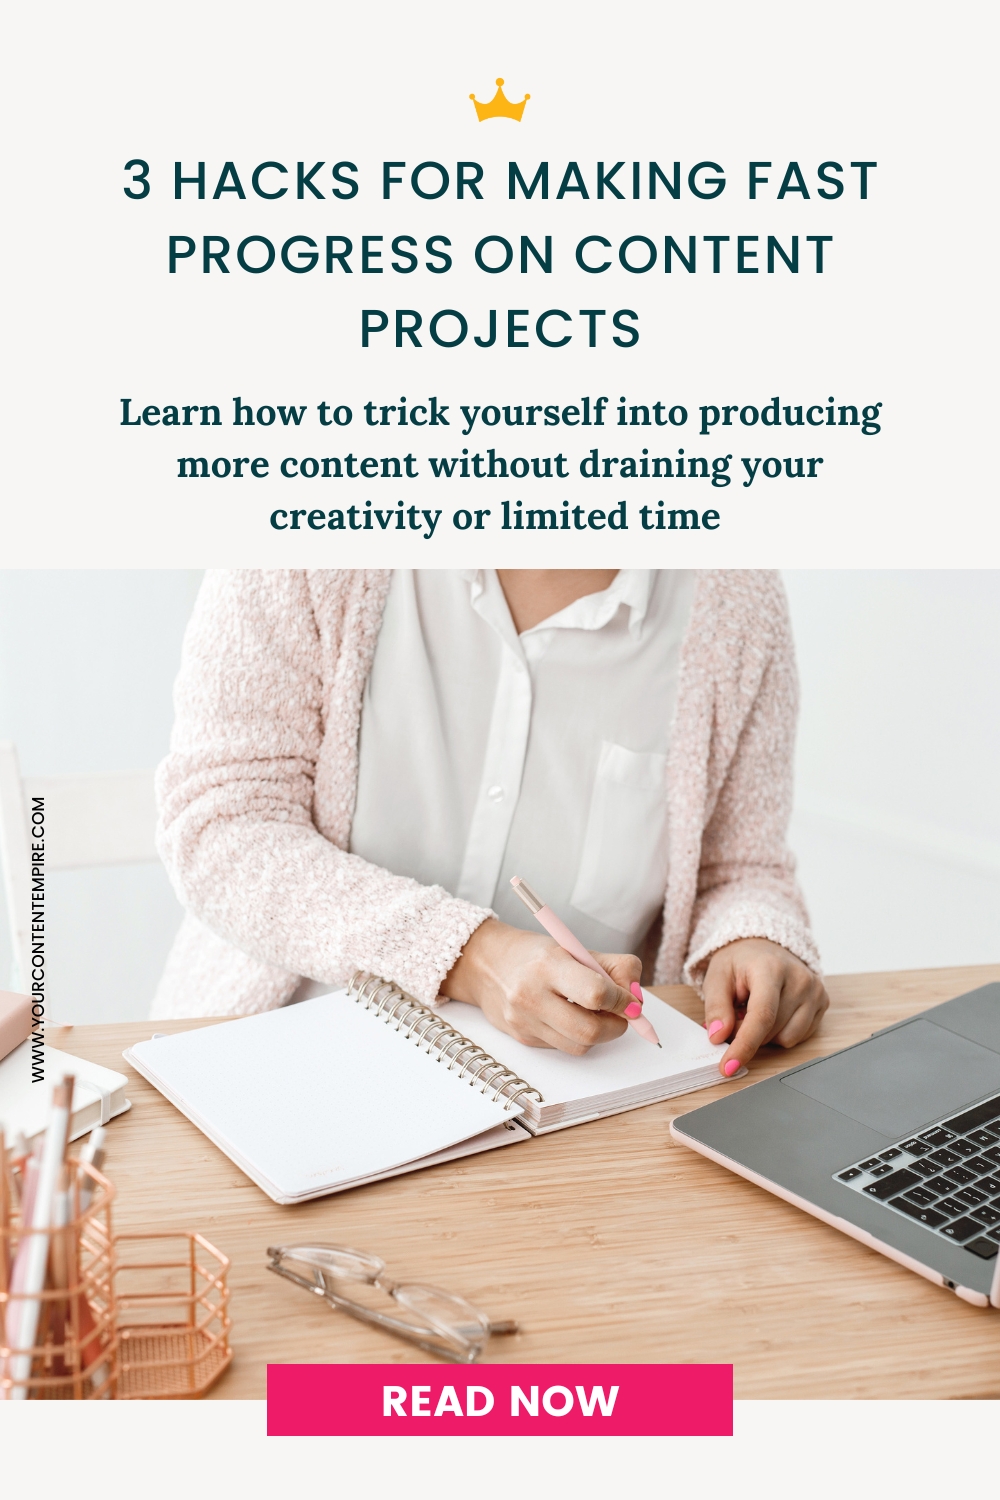 3 Hacks for Making FAST Progress on Content Projects